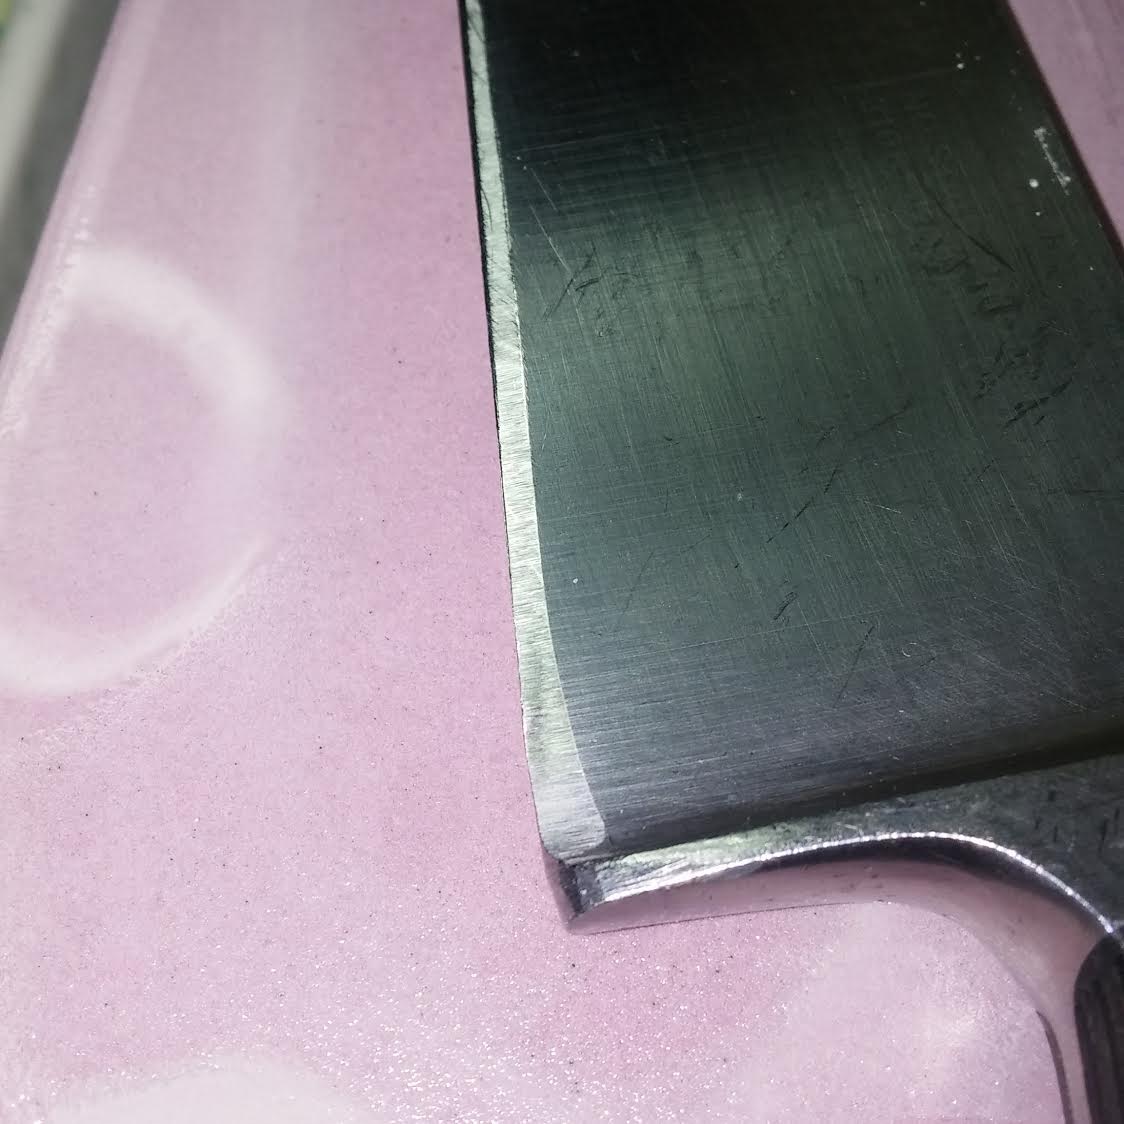 A clear indication of the damage a Grinder can do to a knife.